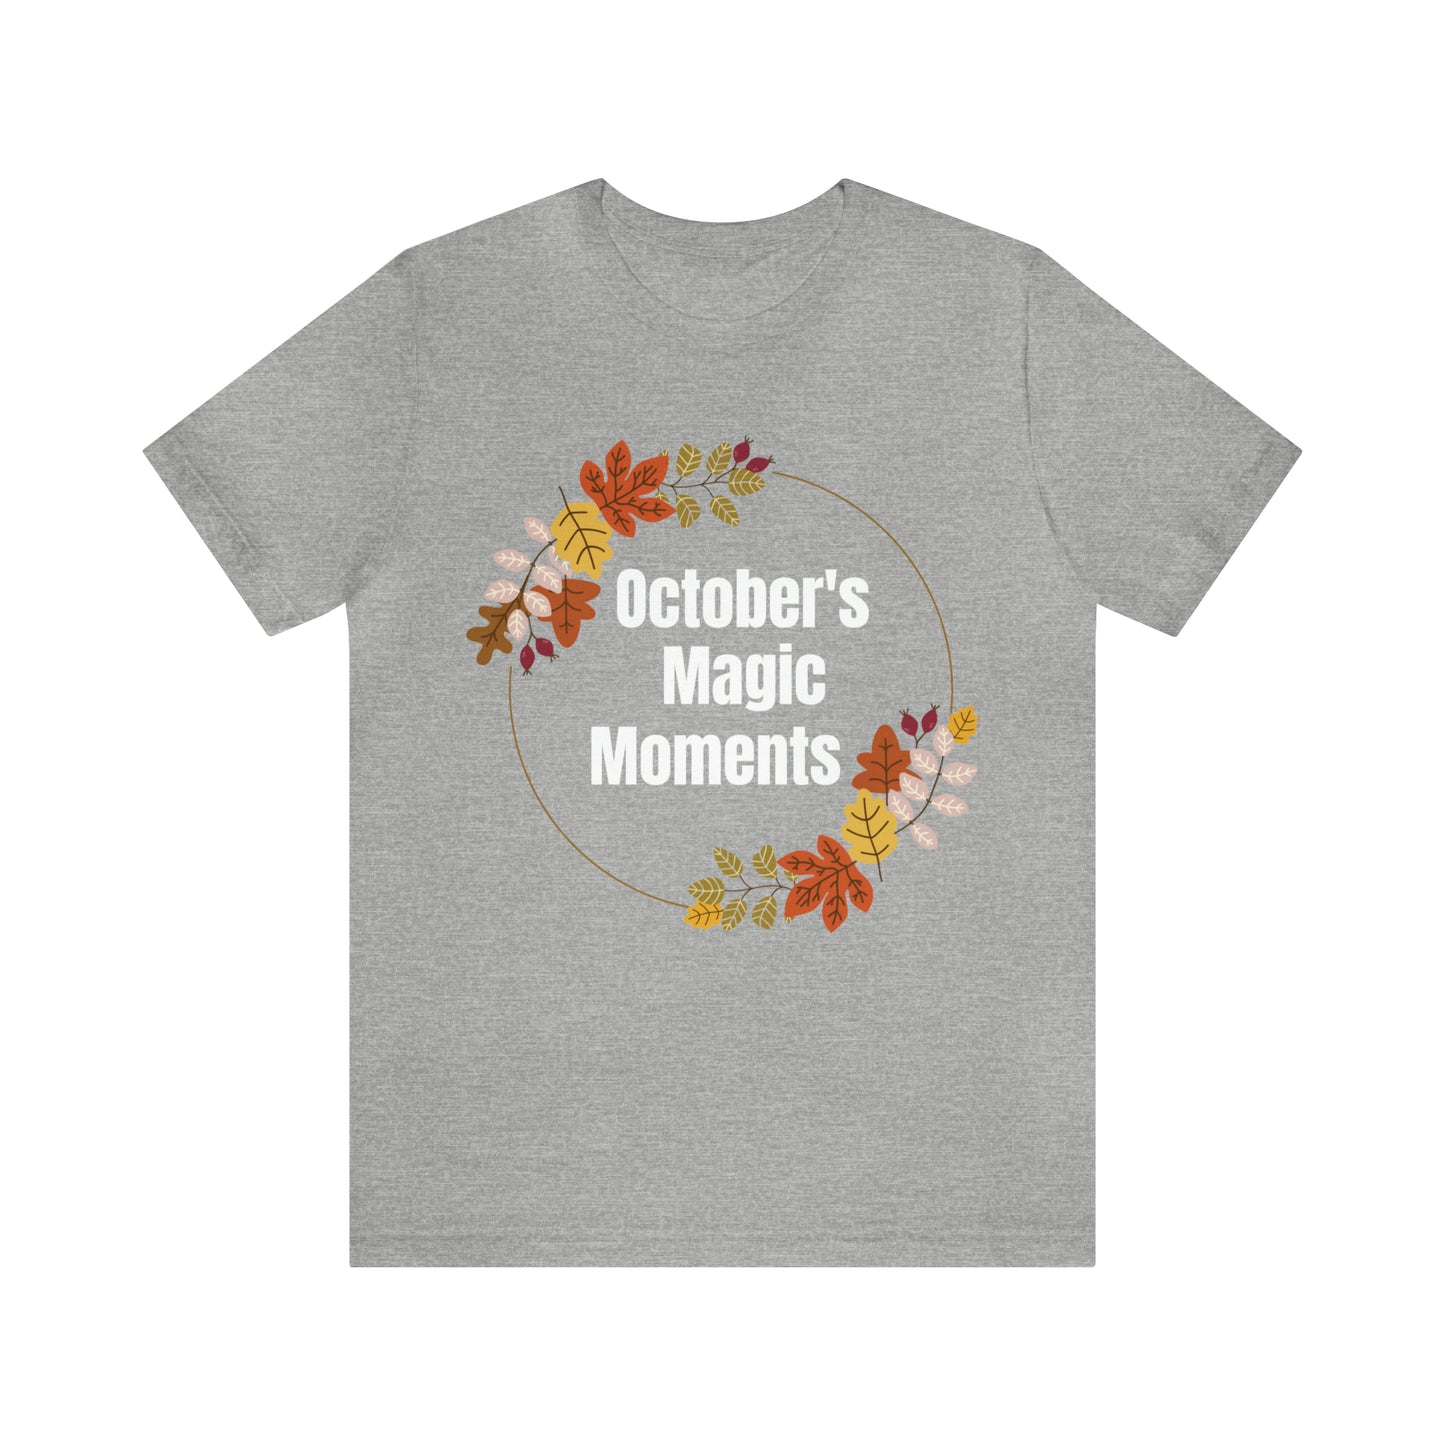 T-Shirt Tshirt Design Gift for Friend and Family Short Sleeved Shirt Fall Style Petrova Designs